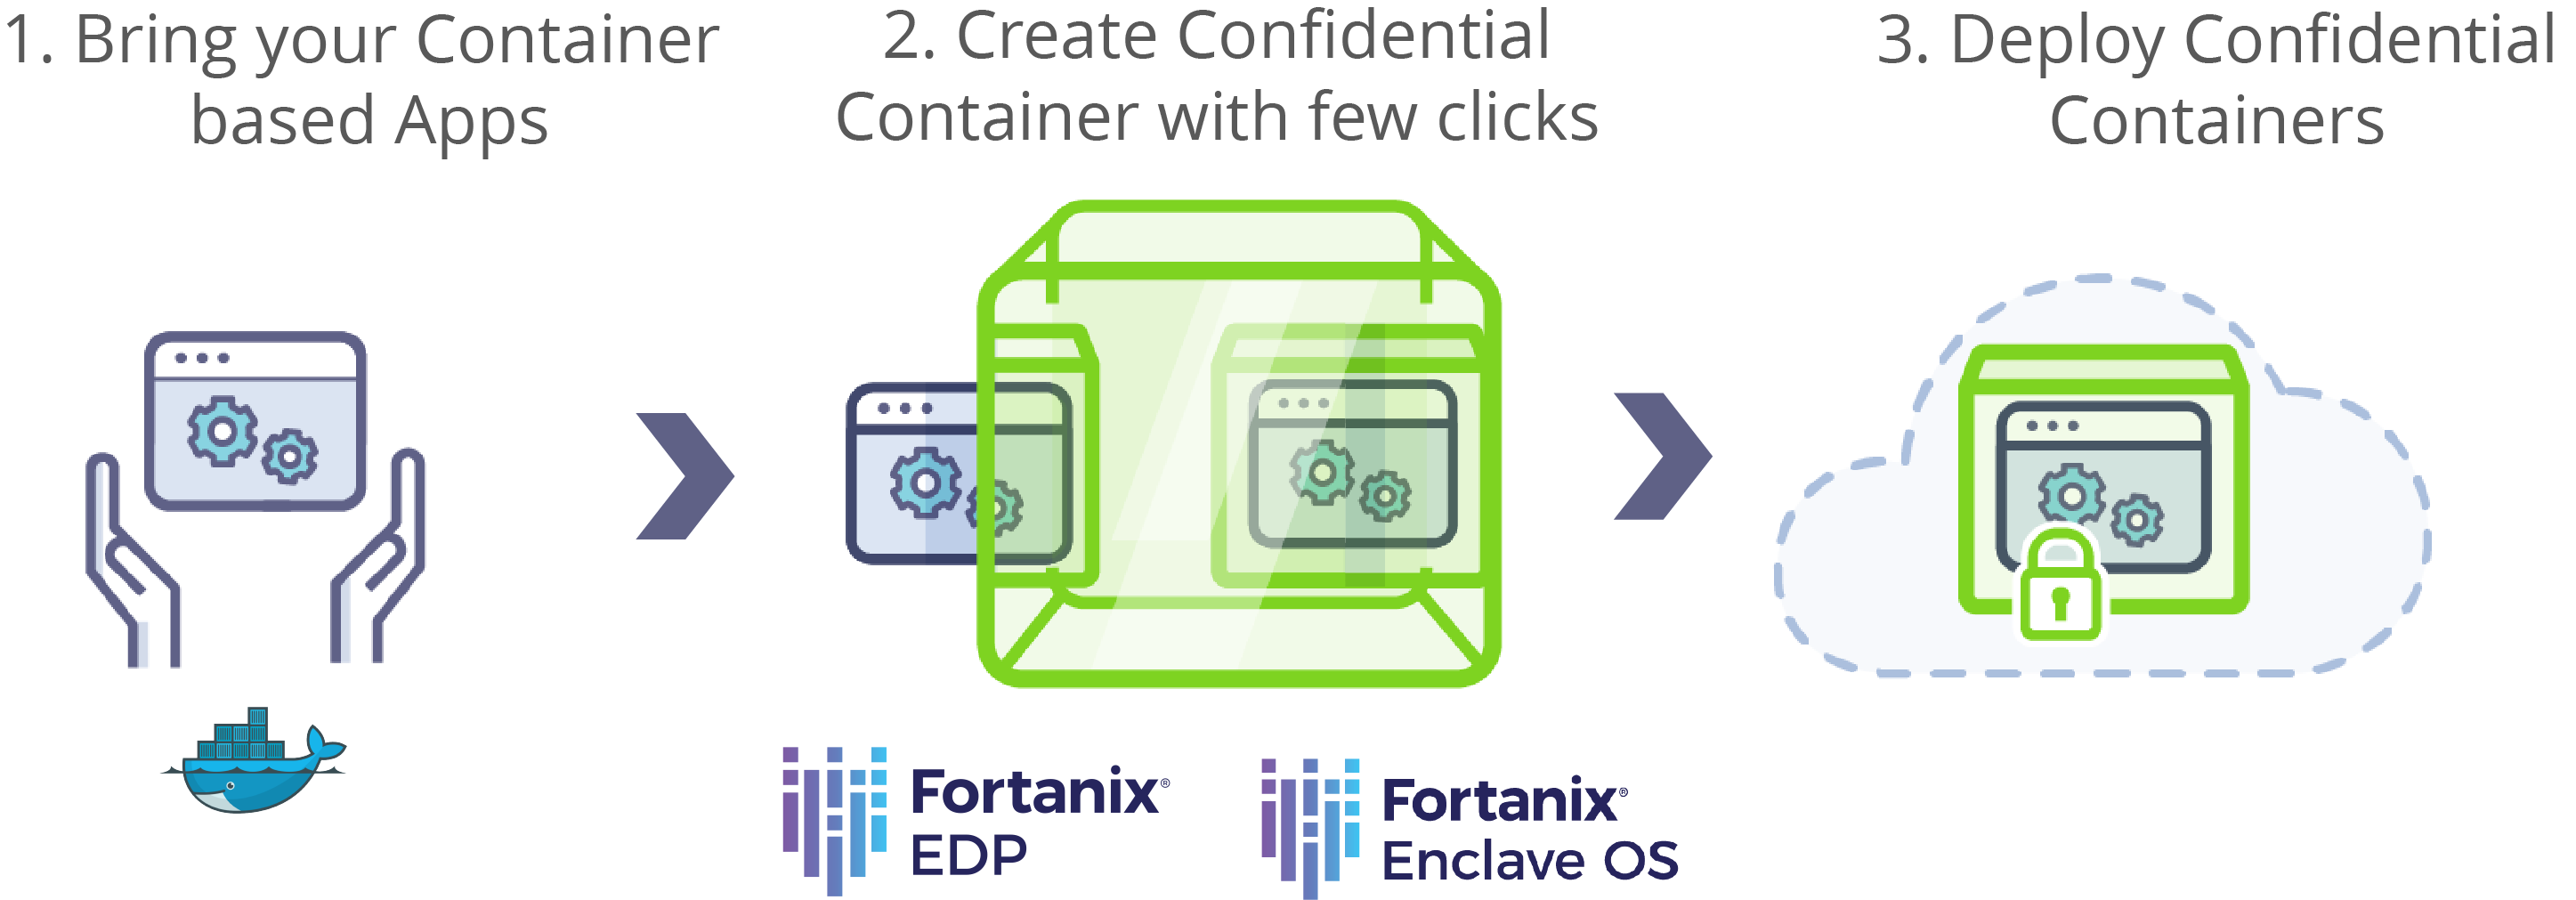 Diagram of Fortanix deployment process, showing steps to move applications to confidential containers and deploy.